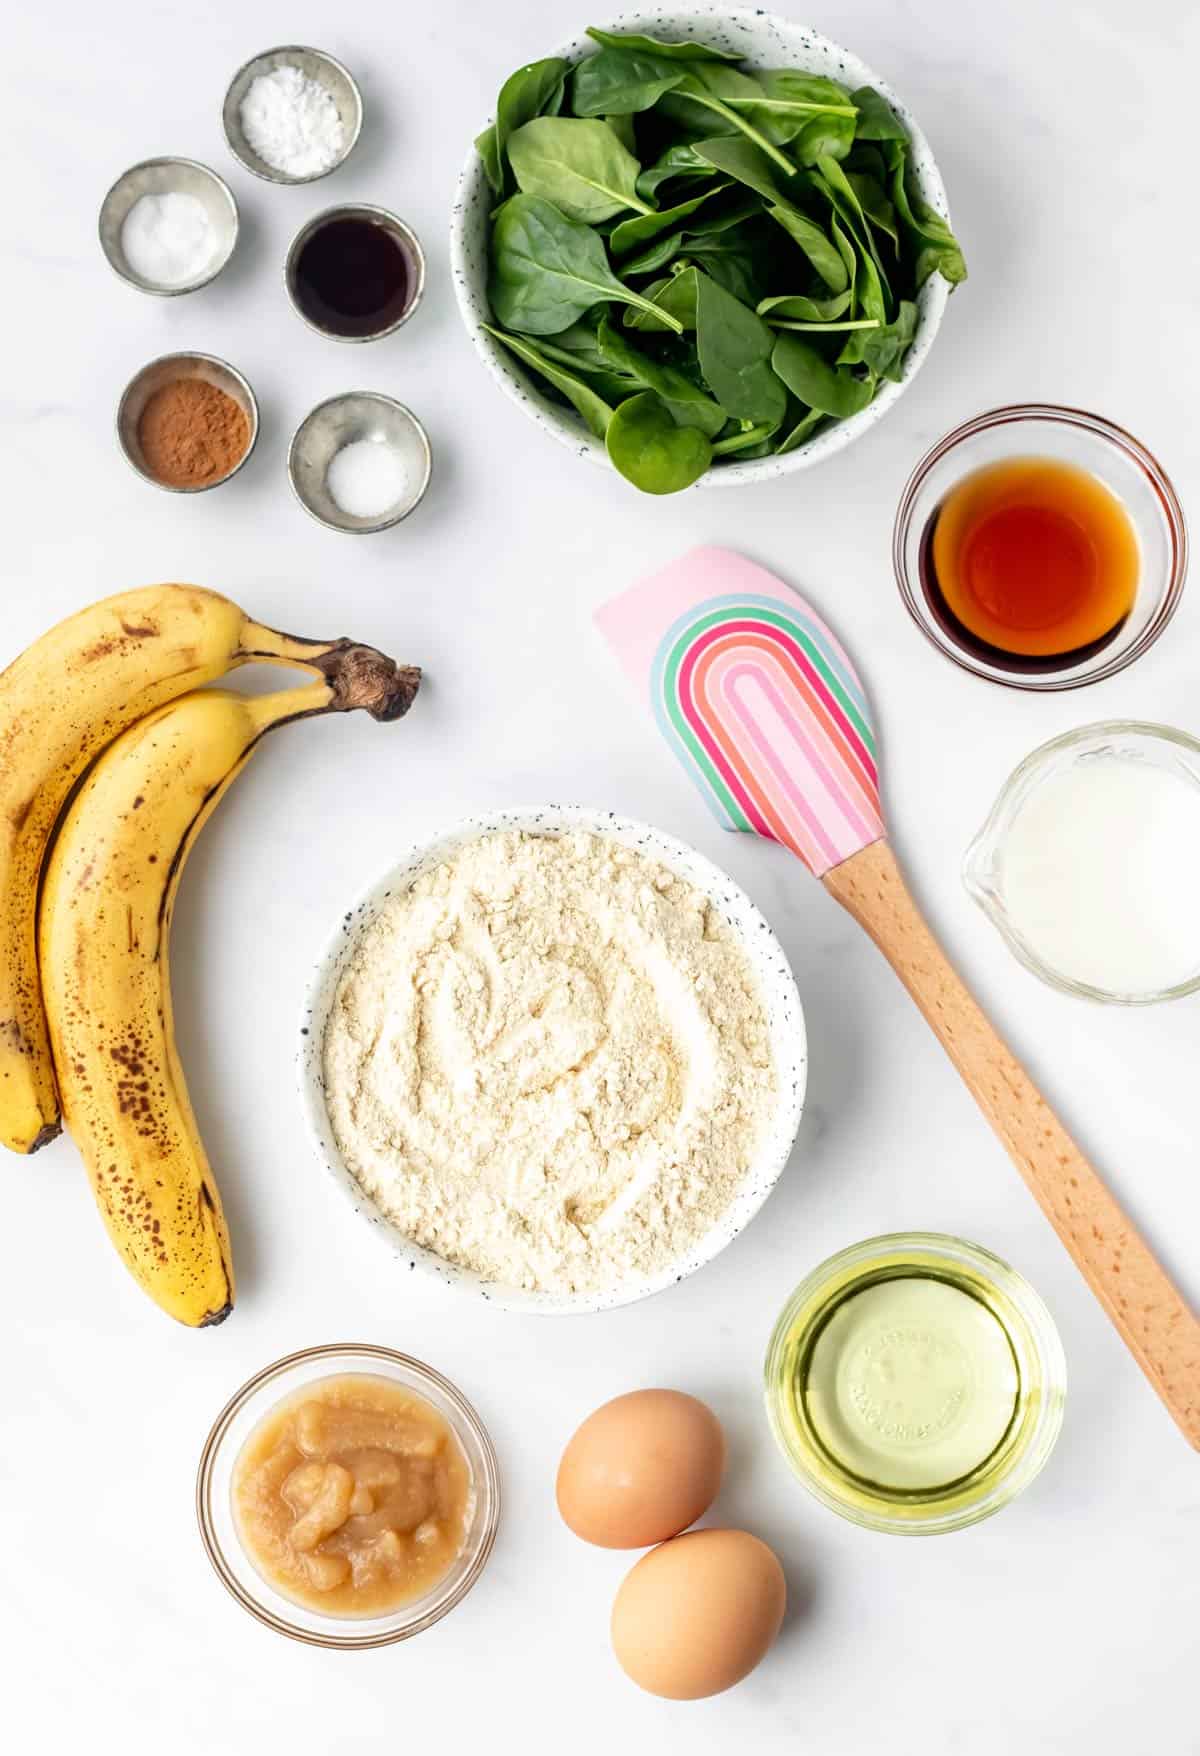 Ingredients required to make green banana muffins.